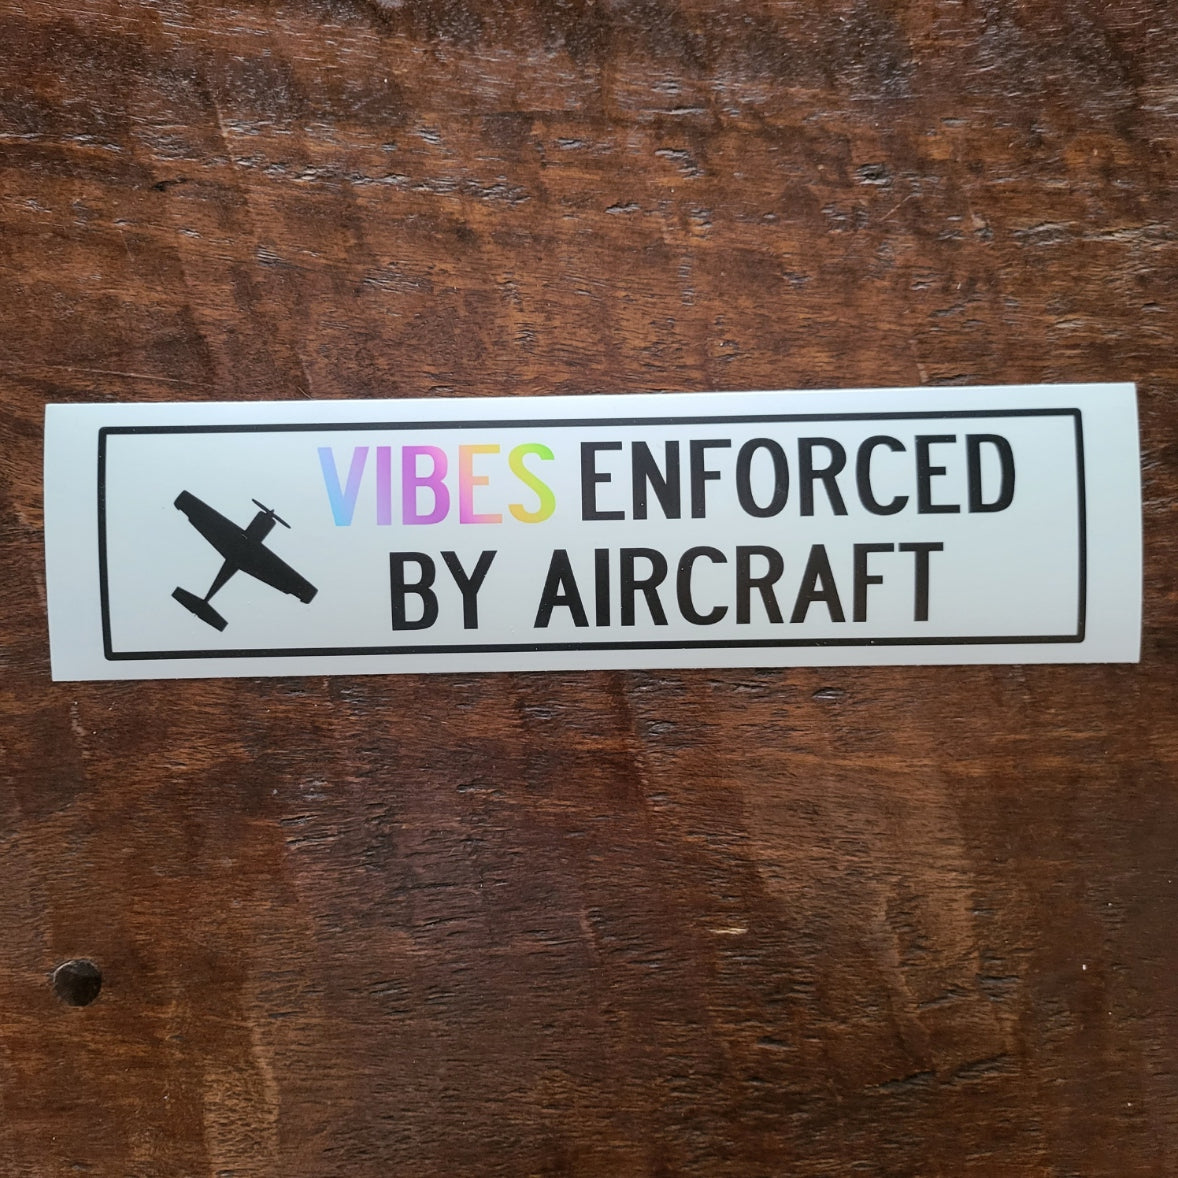 Vibes Enforced by Aircraft